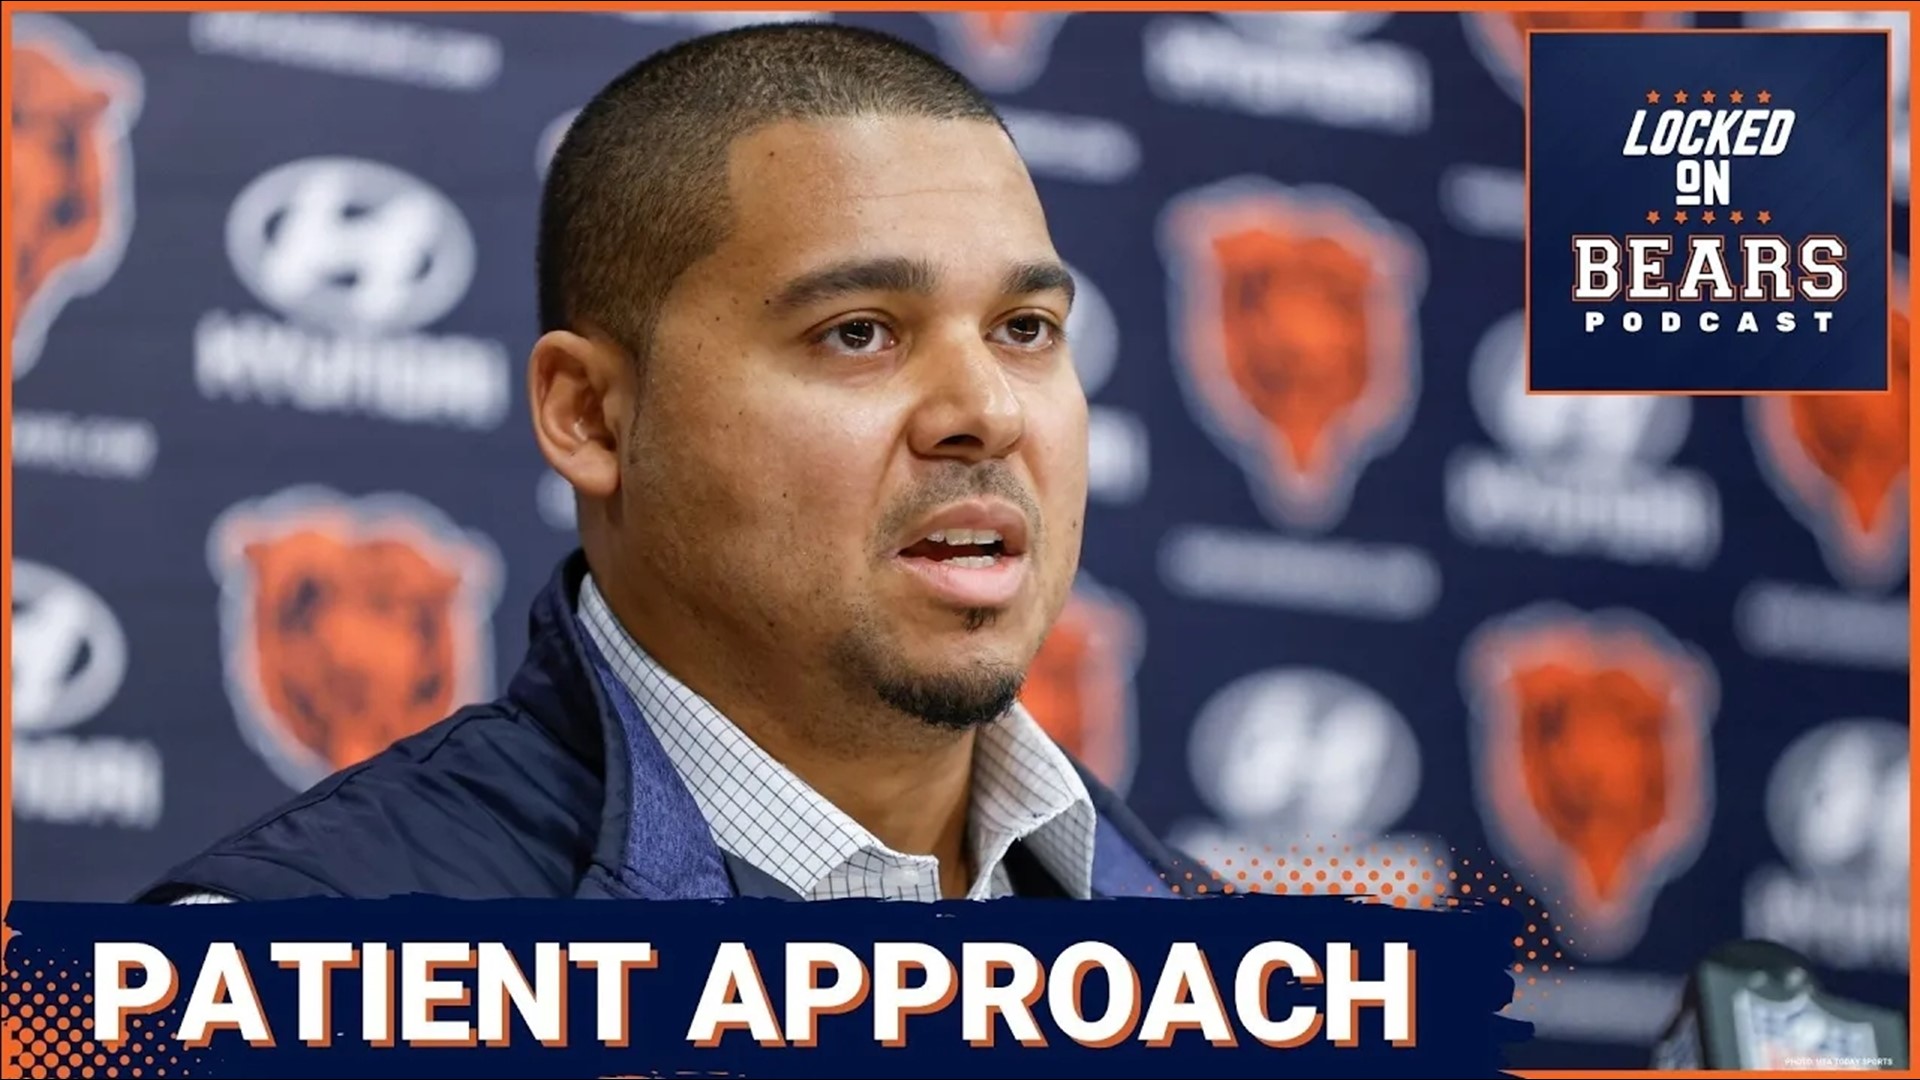 Chicago Bears general manager Ryan Poles didn't panic and get in bidding wars for the top offensive and defensive linemen in free agency.